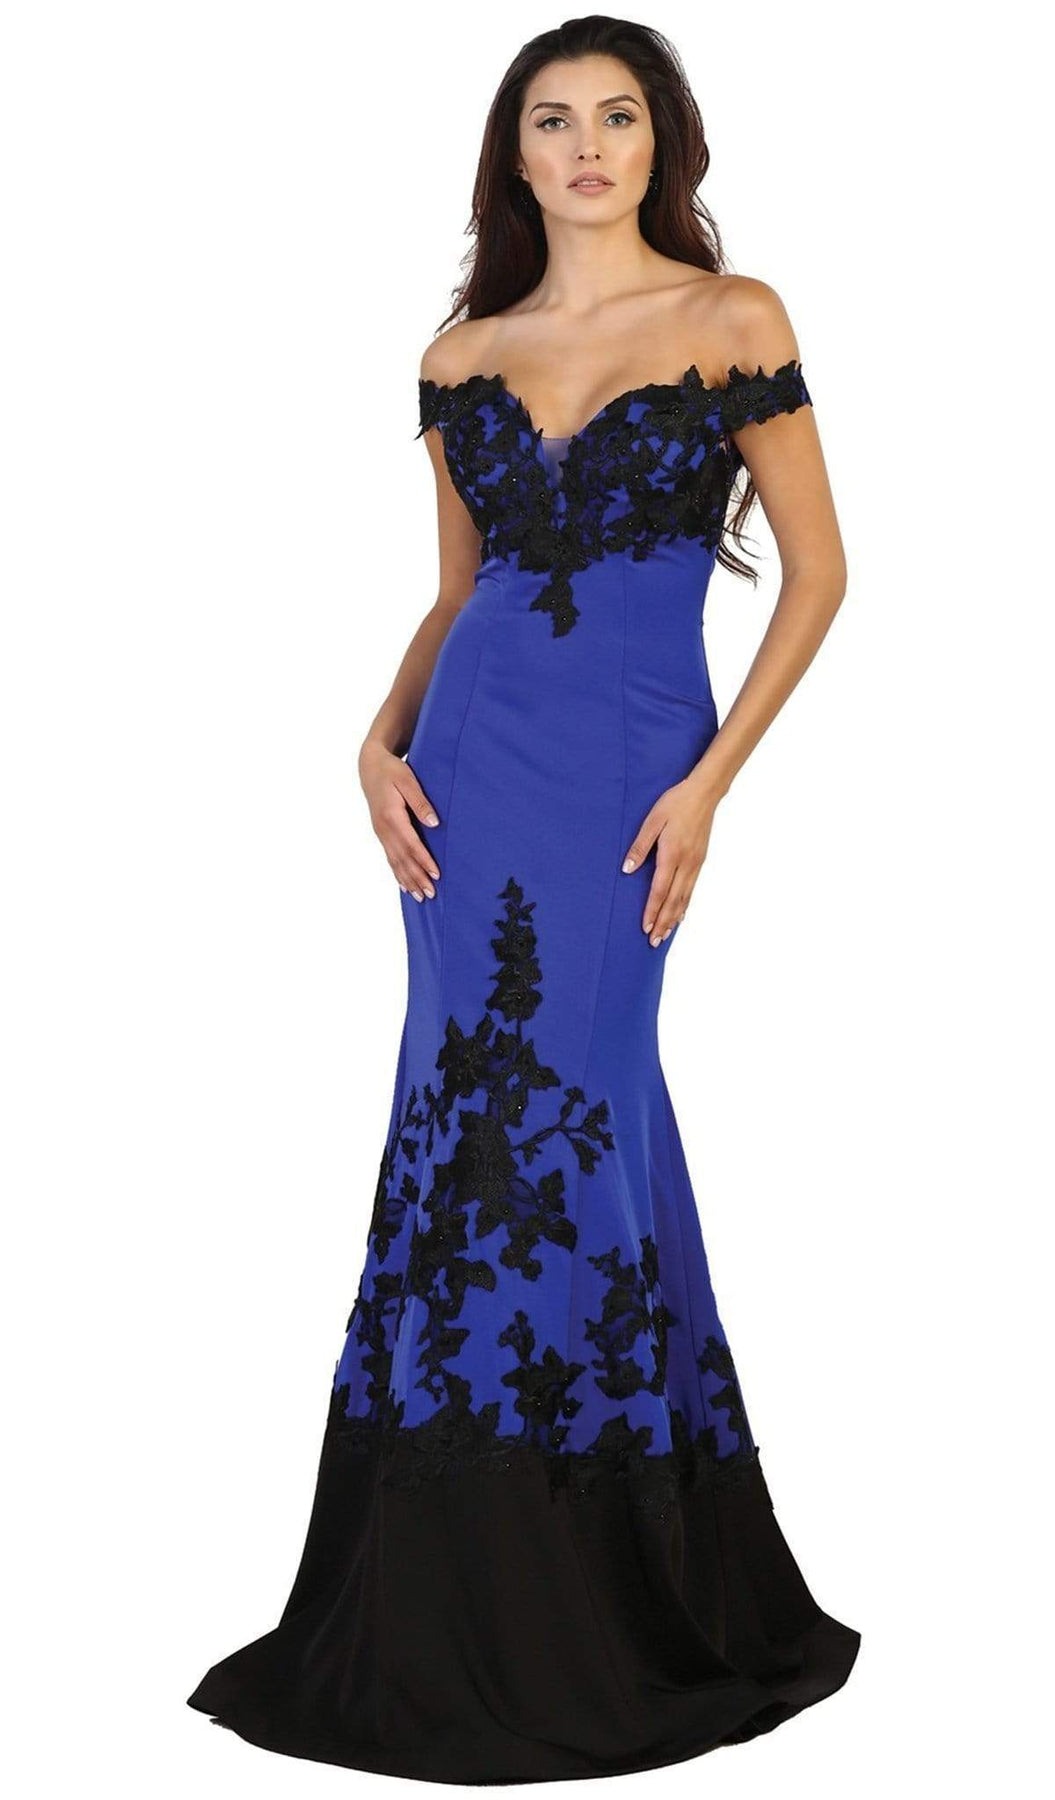 May Queen - RQ7499 Two Toned Off Shoulder Mermaid Gown Special Occasion Dress 4 / Royal/Blk